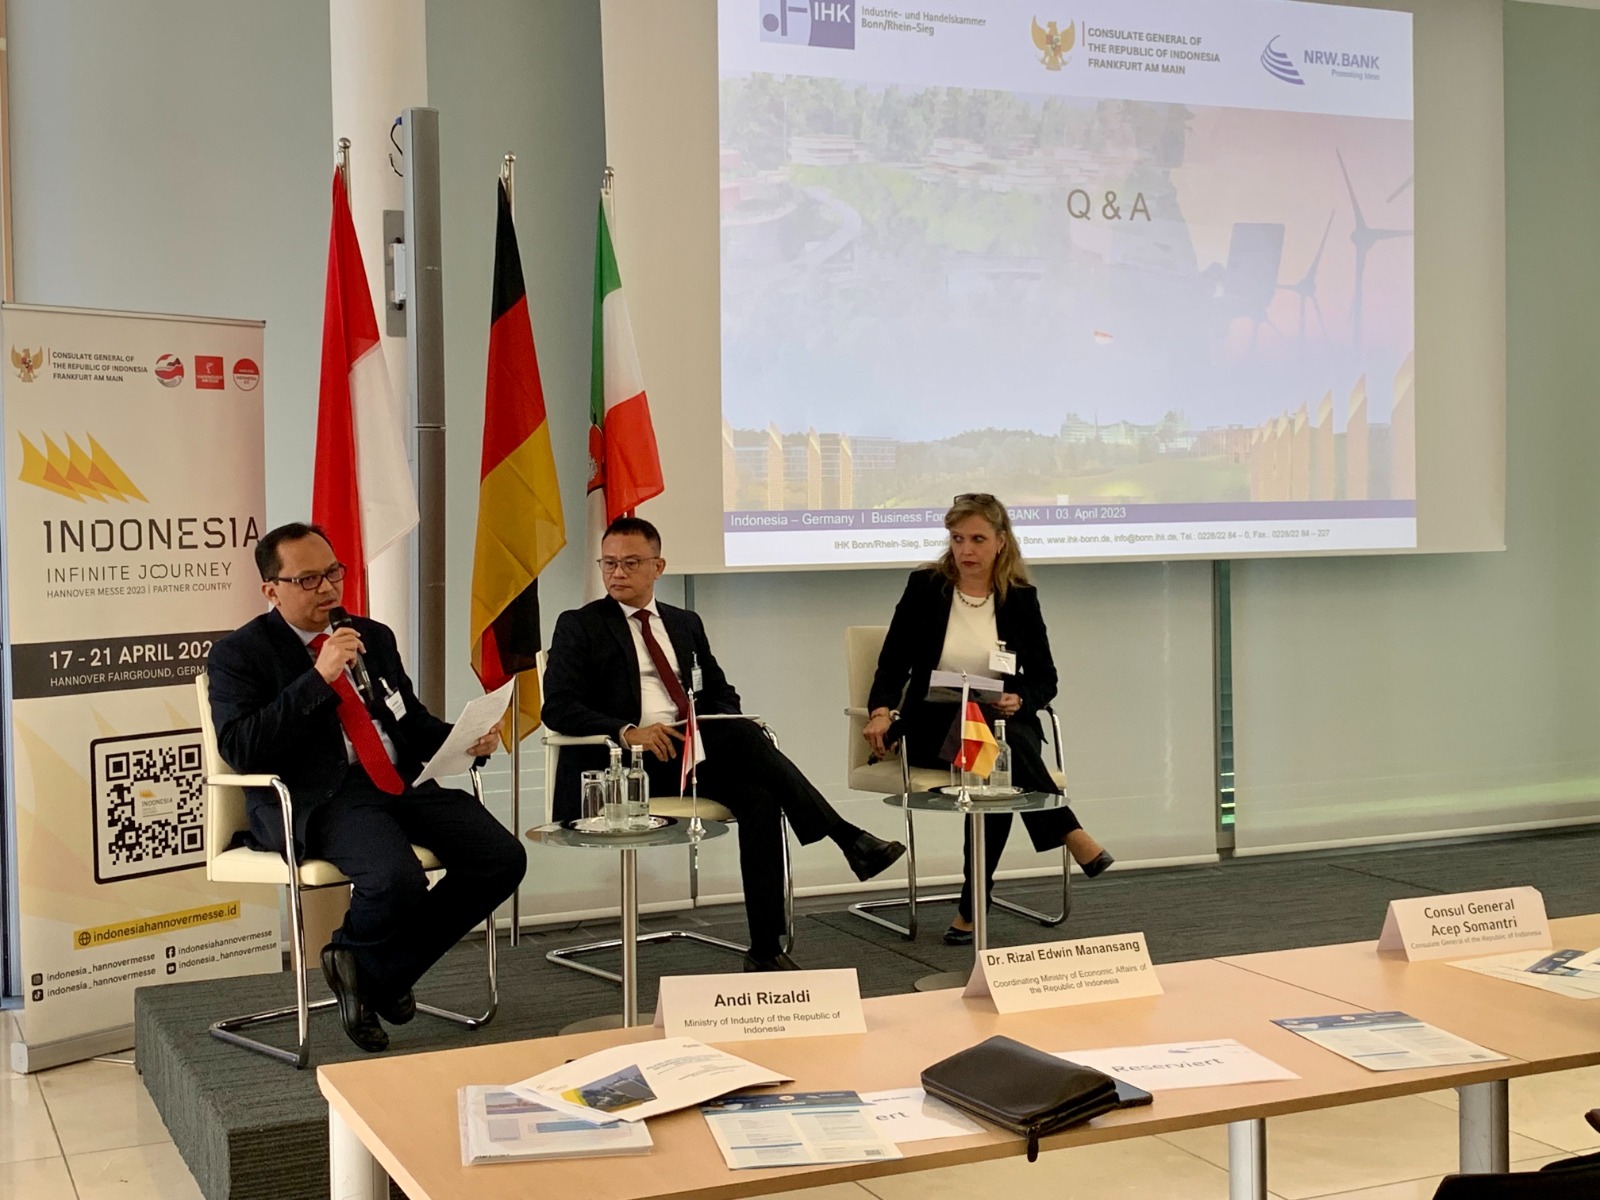 Promoting Indonesia as a Partner Country for Hannover Messe 2023, the Ministry of Industry Encourage Opportunities for Strategic Sectors Cooperation of Germany and Indonesia.